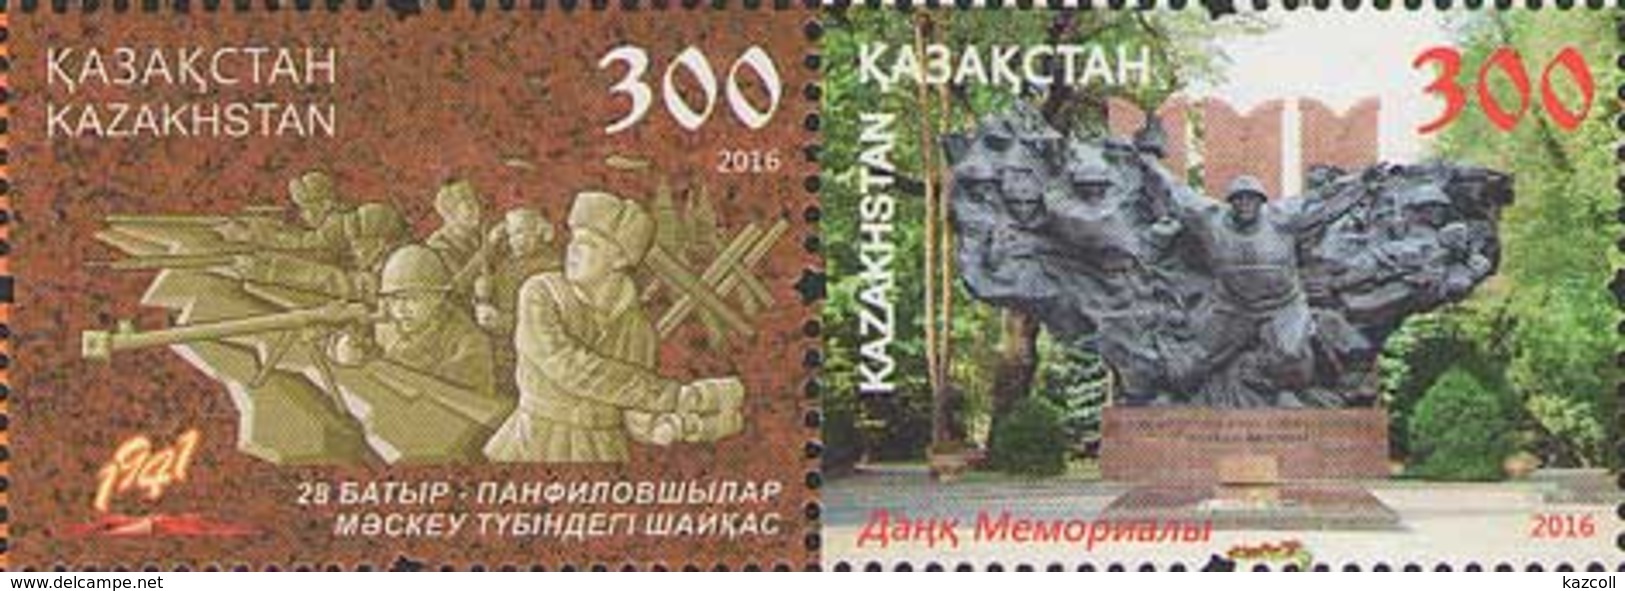 Kazakhstan 2016. 75th Anniversary Of The Feat Panfilov Heroes. Kazakhstan-Russia Joint Issue. Mi.#989-990Zd. MNH - Kasachstan